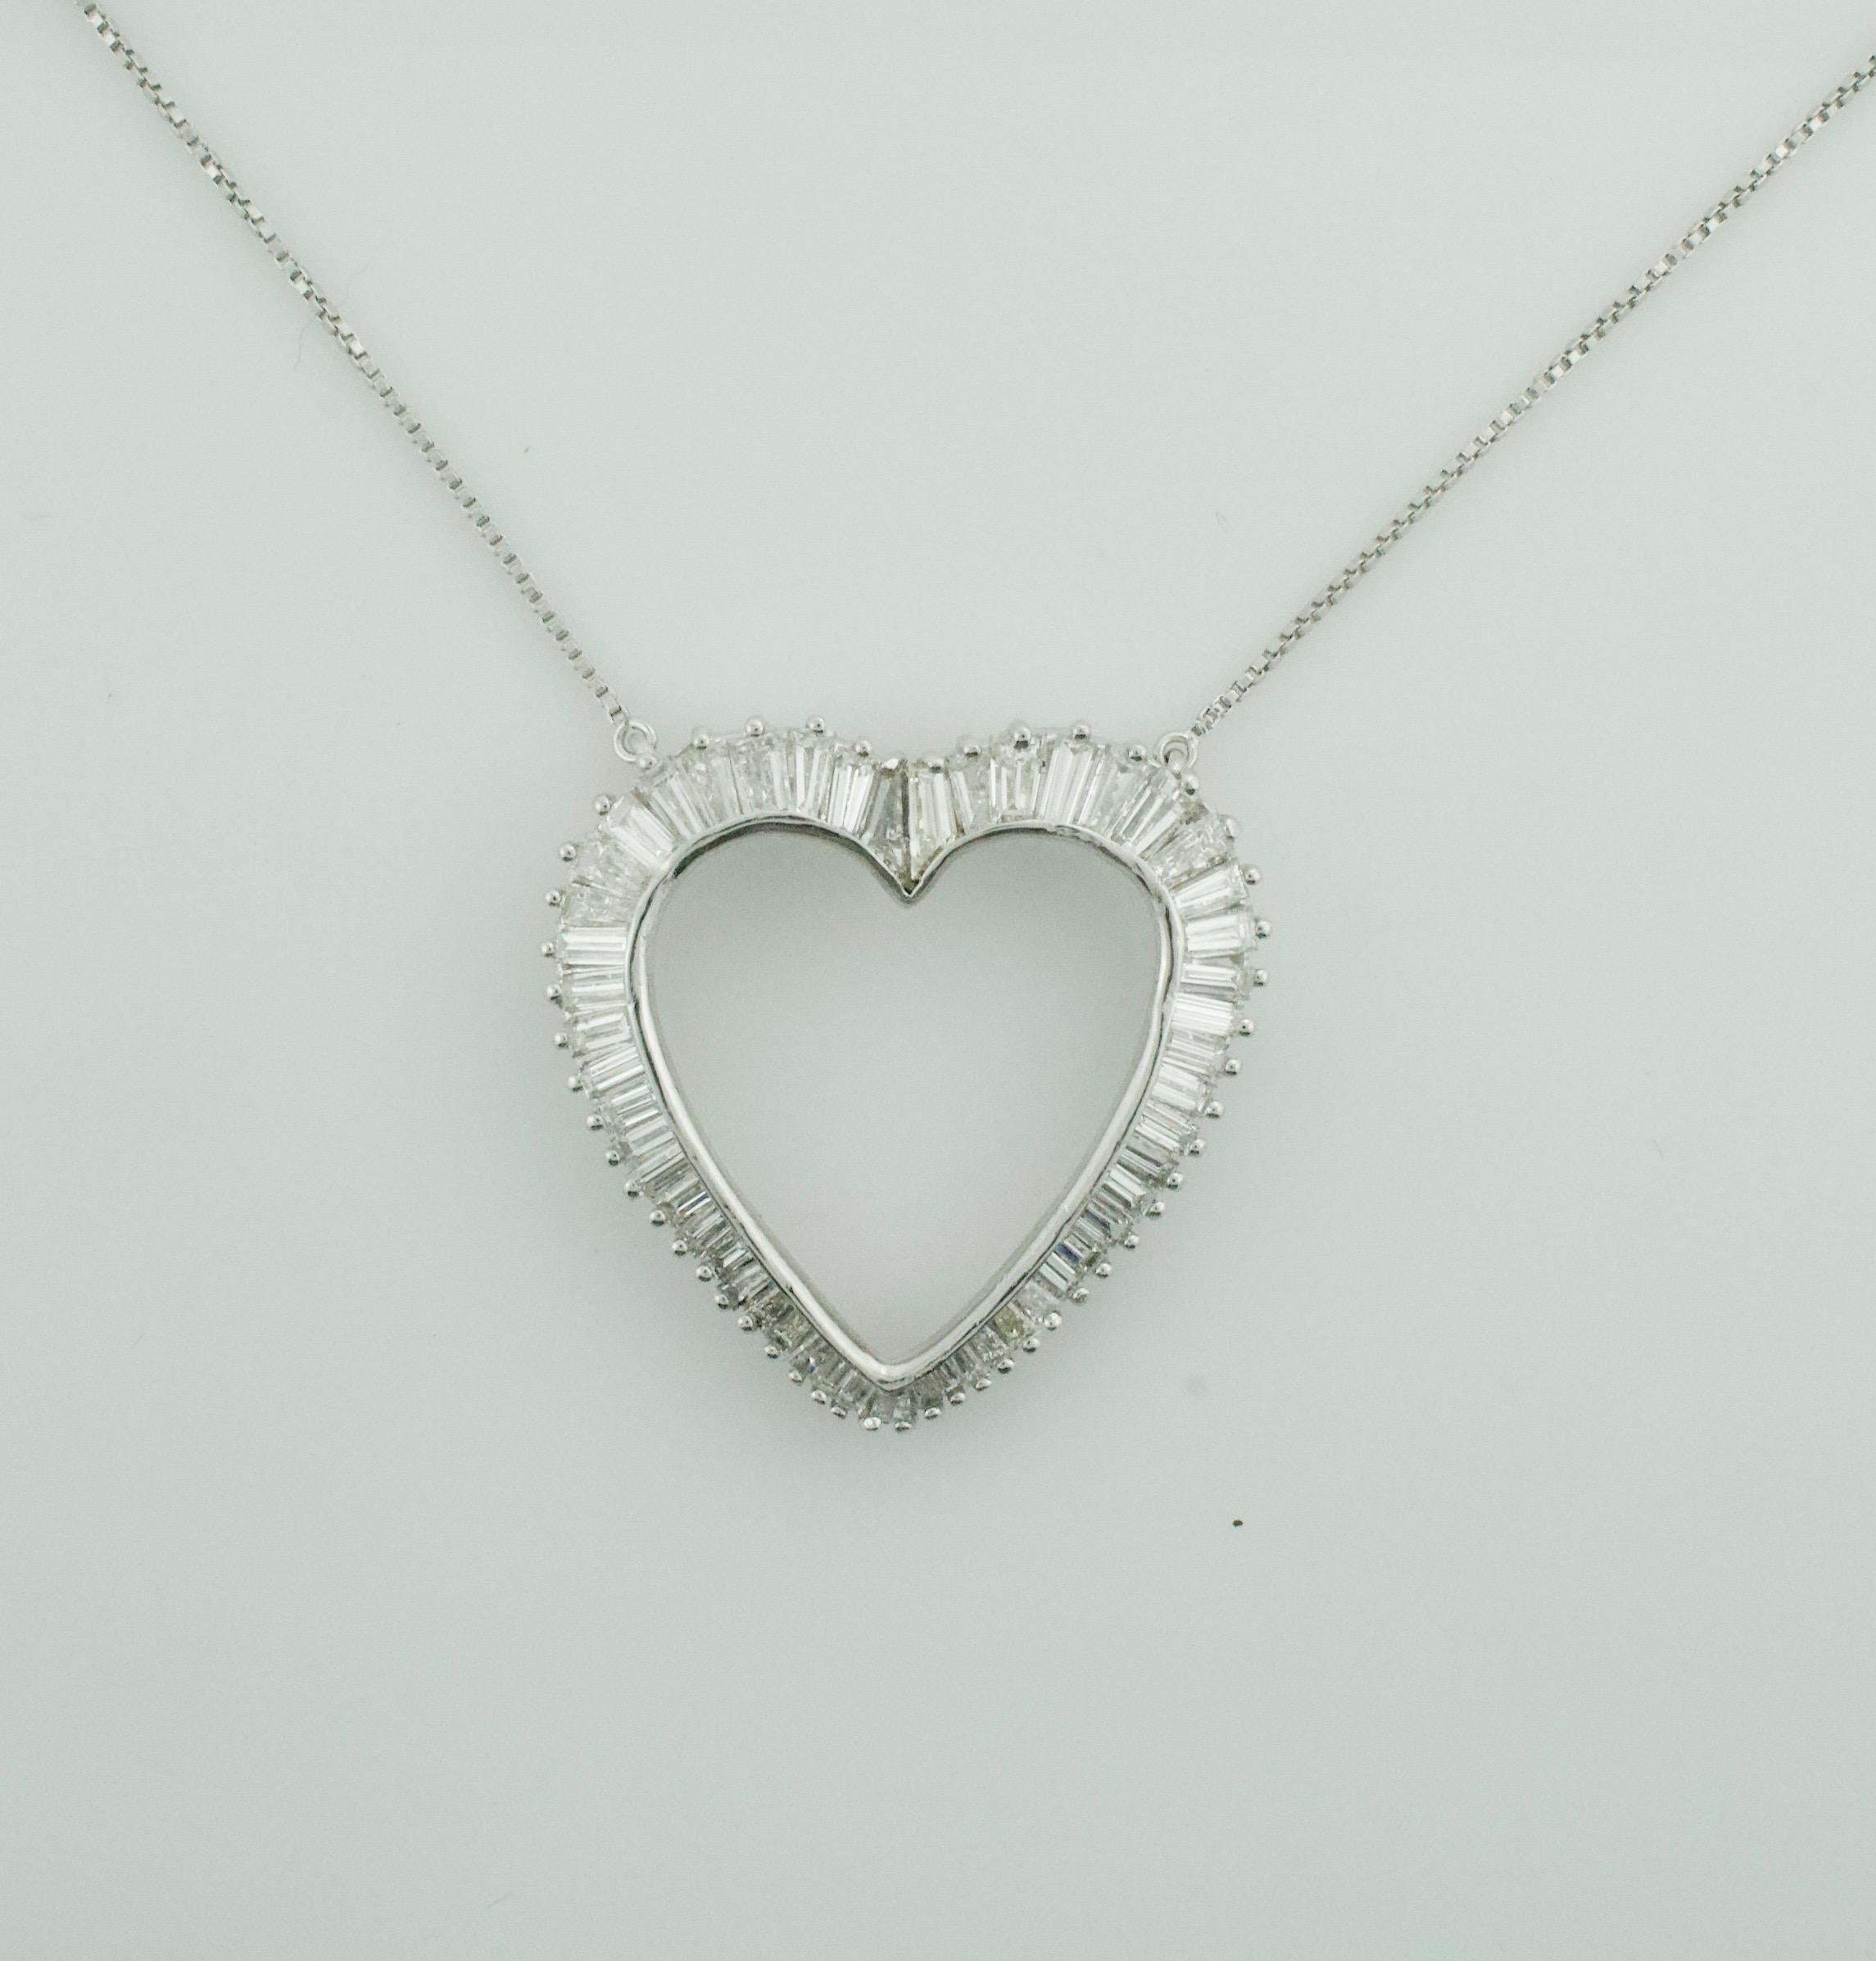 💖 Discover Timeless Romance: Platinum Diamond Baguette Heart Necklace 💖

Step into a world of vintage elegance with our exquisite Platinum Diamond Baguette Heart Necklace, a stunning piece reminiscent of the glamour and romance of the 1960s.